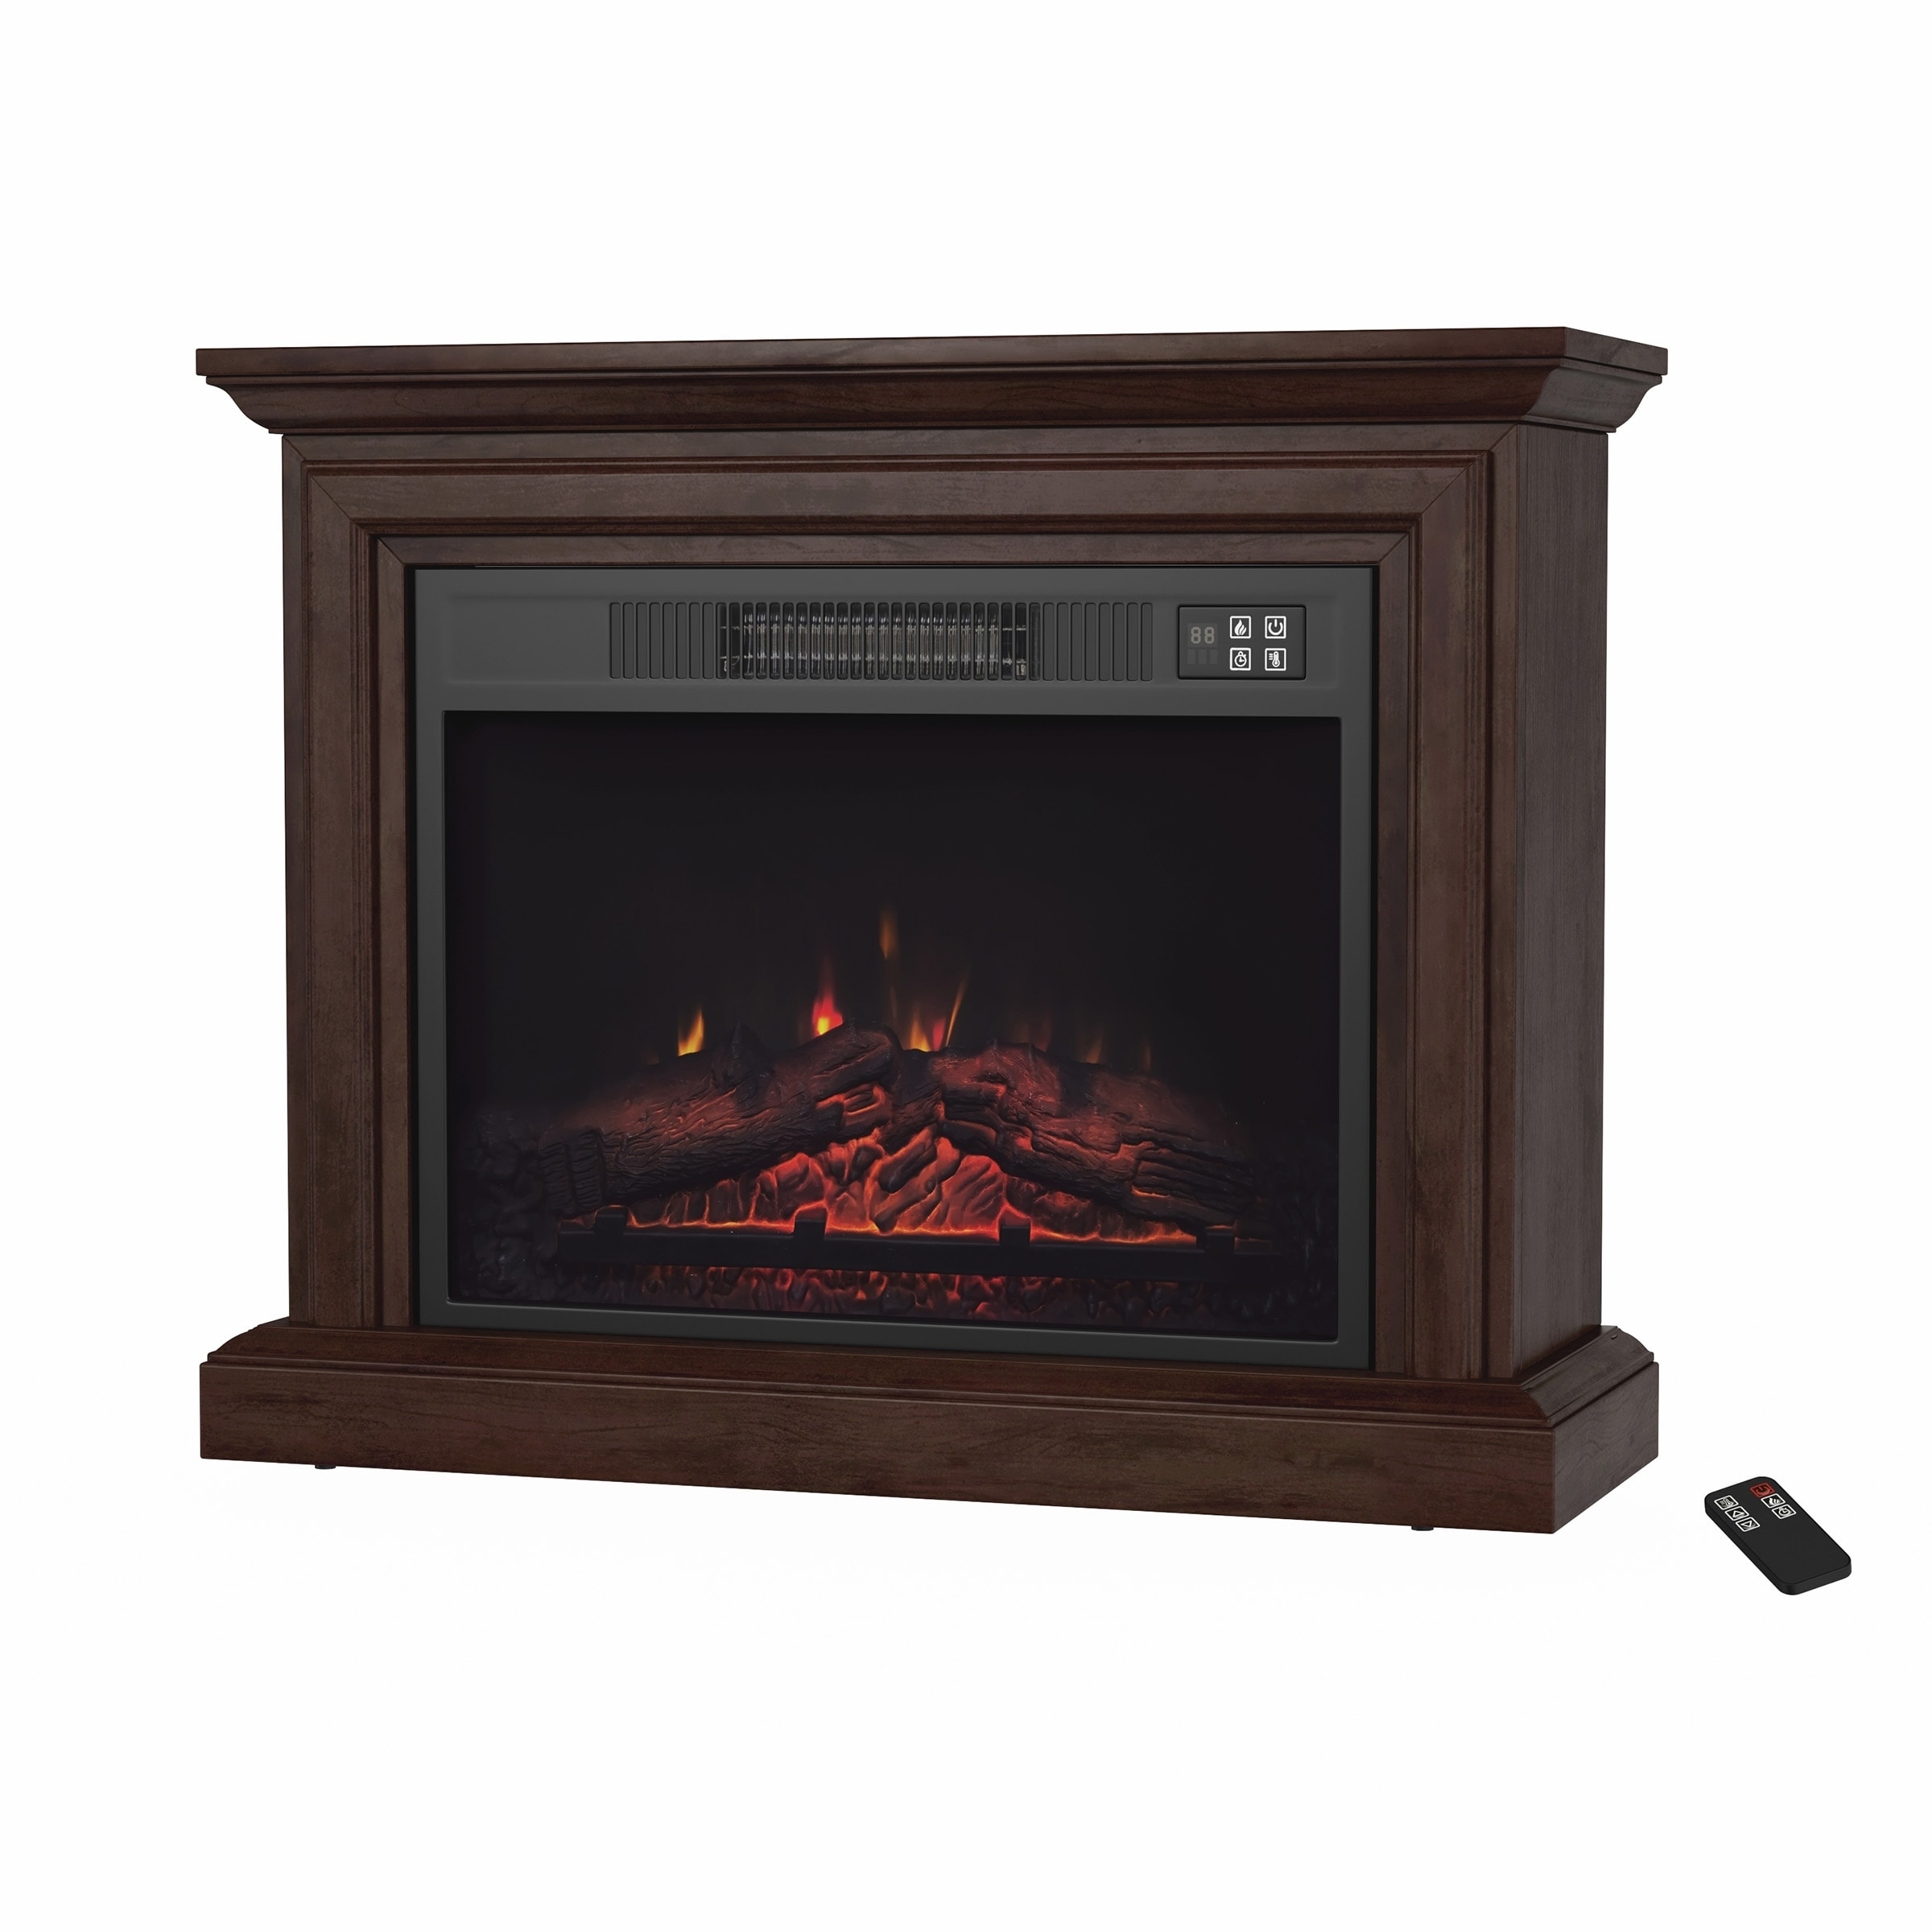 Copper Grove Codru Brown Portable Electric Fireplace with Mantel - 31 x 10.75 x 25